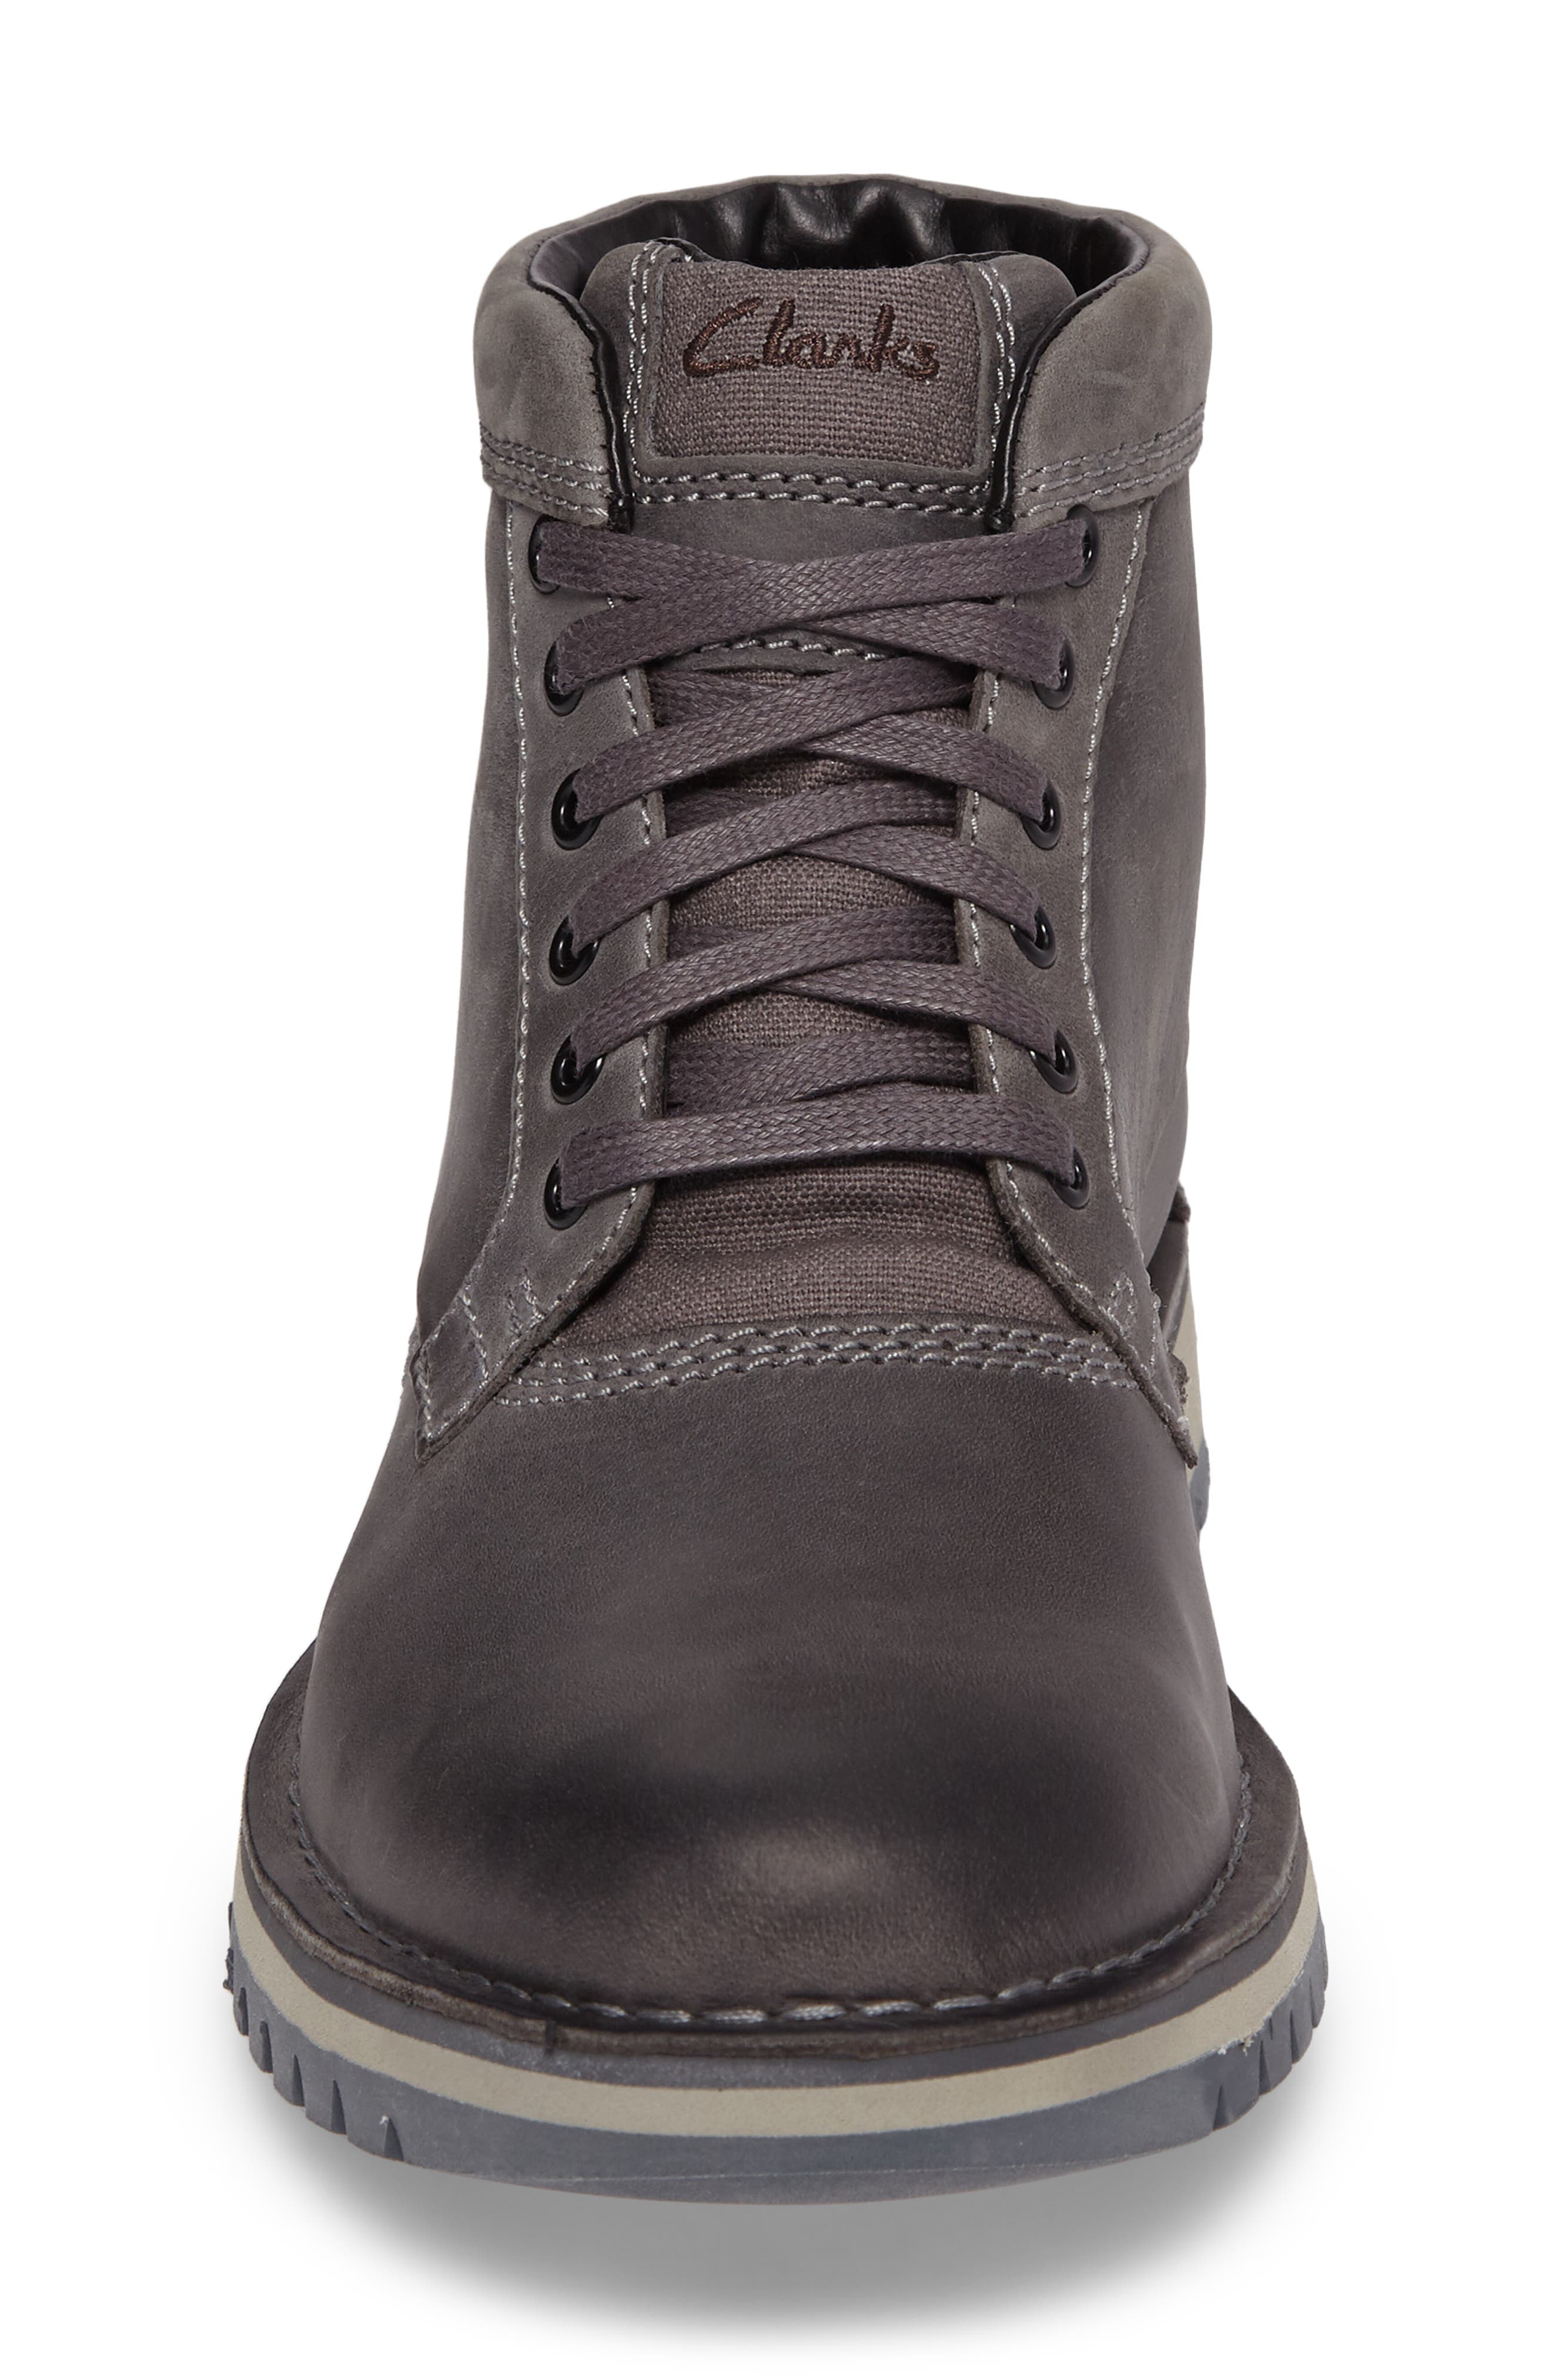 clarks varby boot